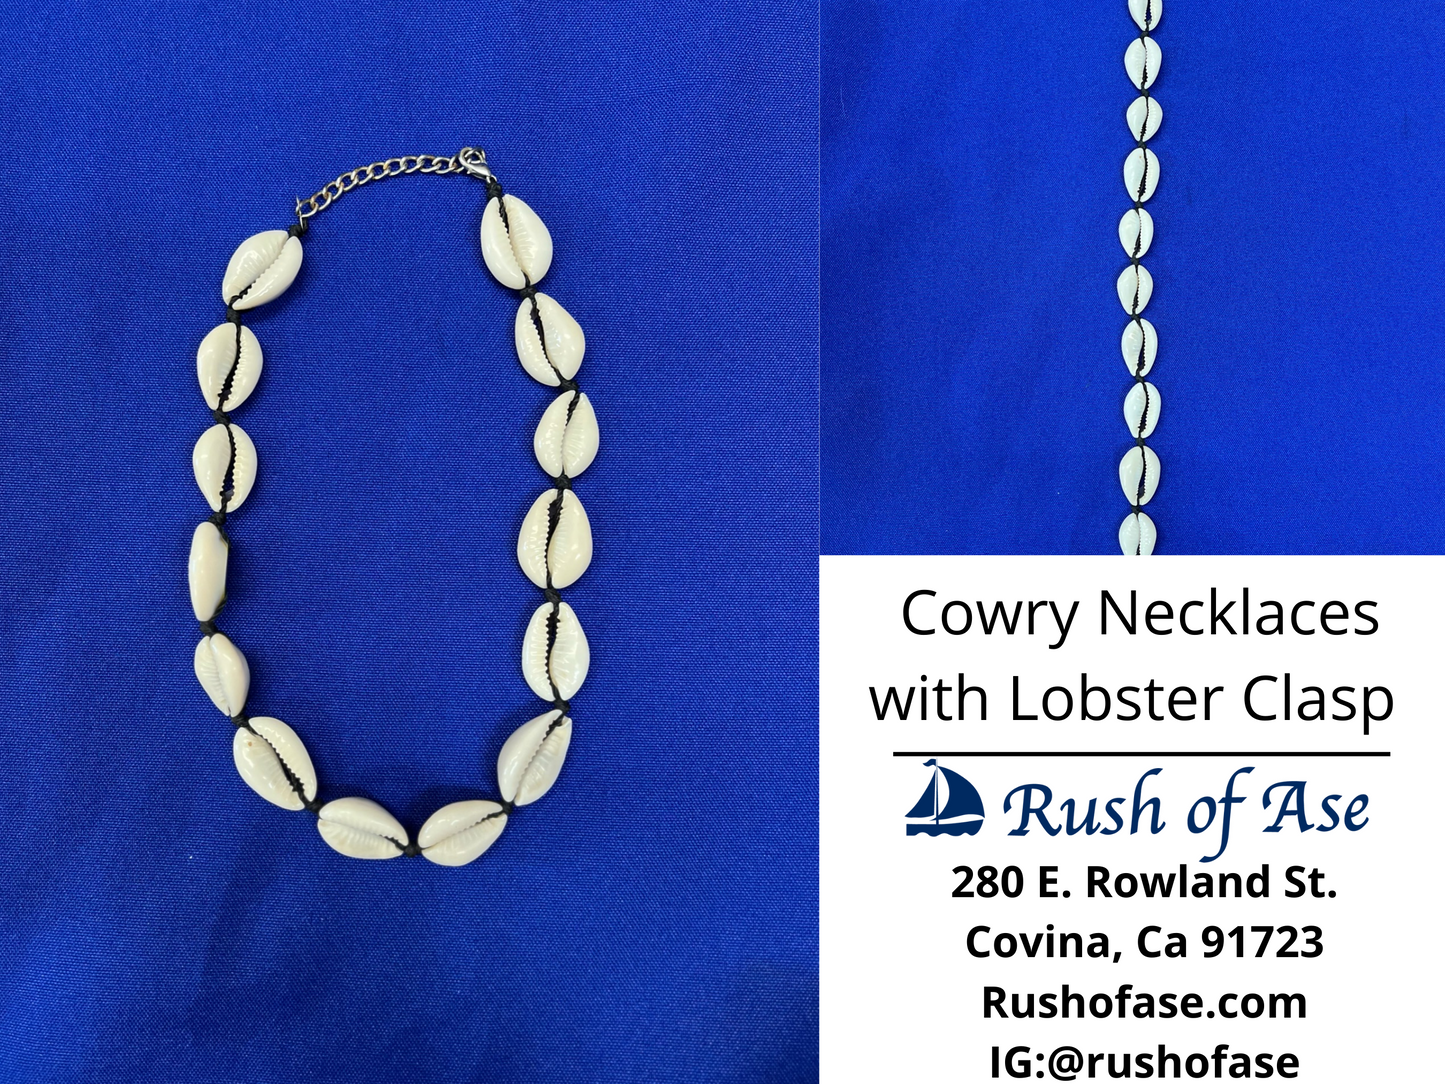 Necklaces | Cowry Necklaces with Lobster Clasp